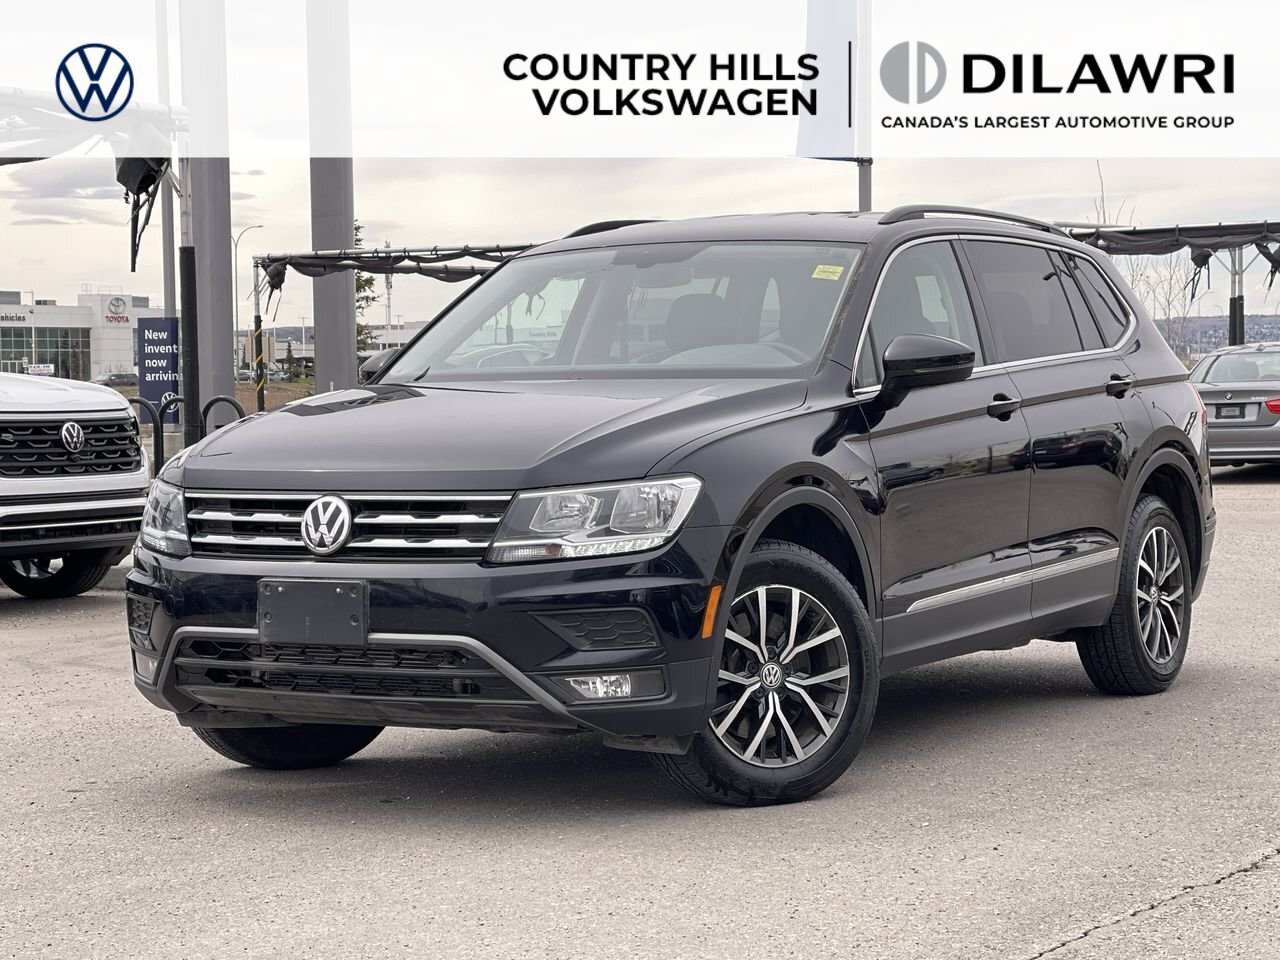 2020 Volkswagen Tiguan Comfortline AWD 2.0L TSI Locally Owned / 